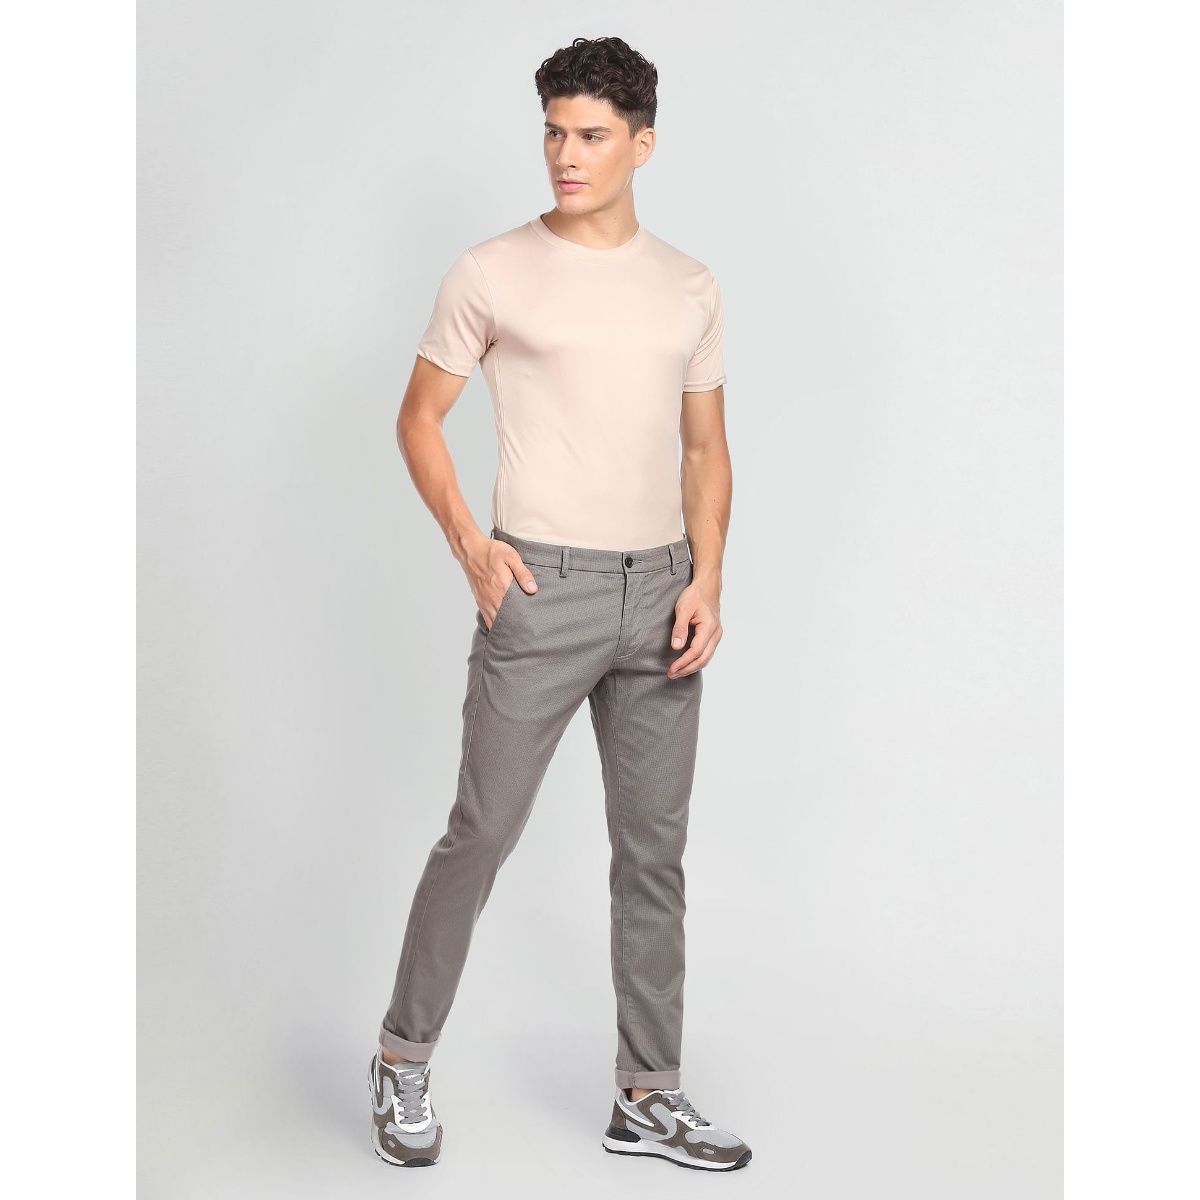 Buy Arrow Sports Low Rise Slim Fit Trousers - NNNOW.com